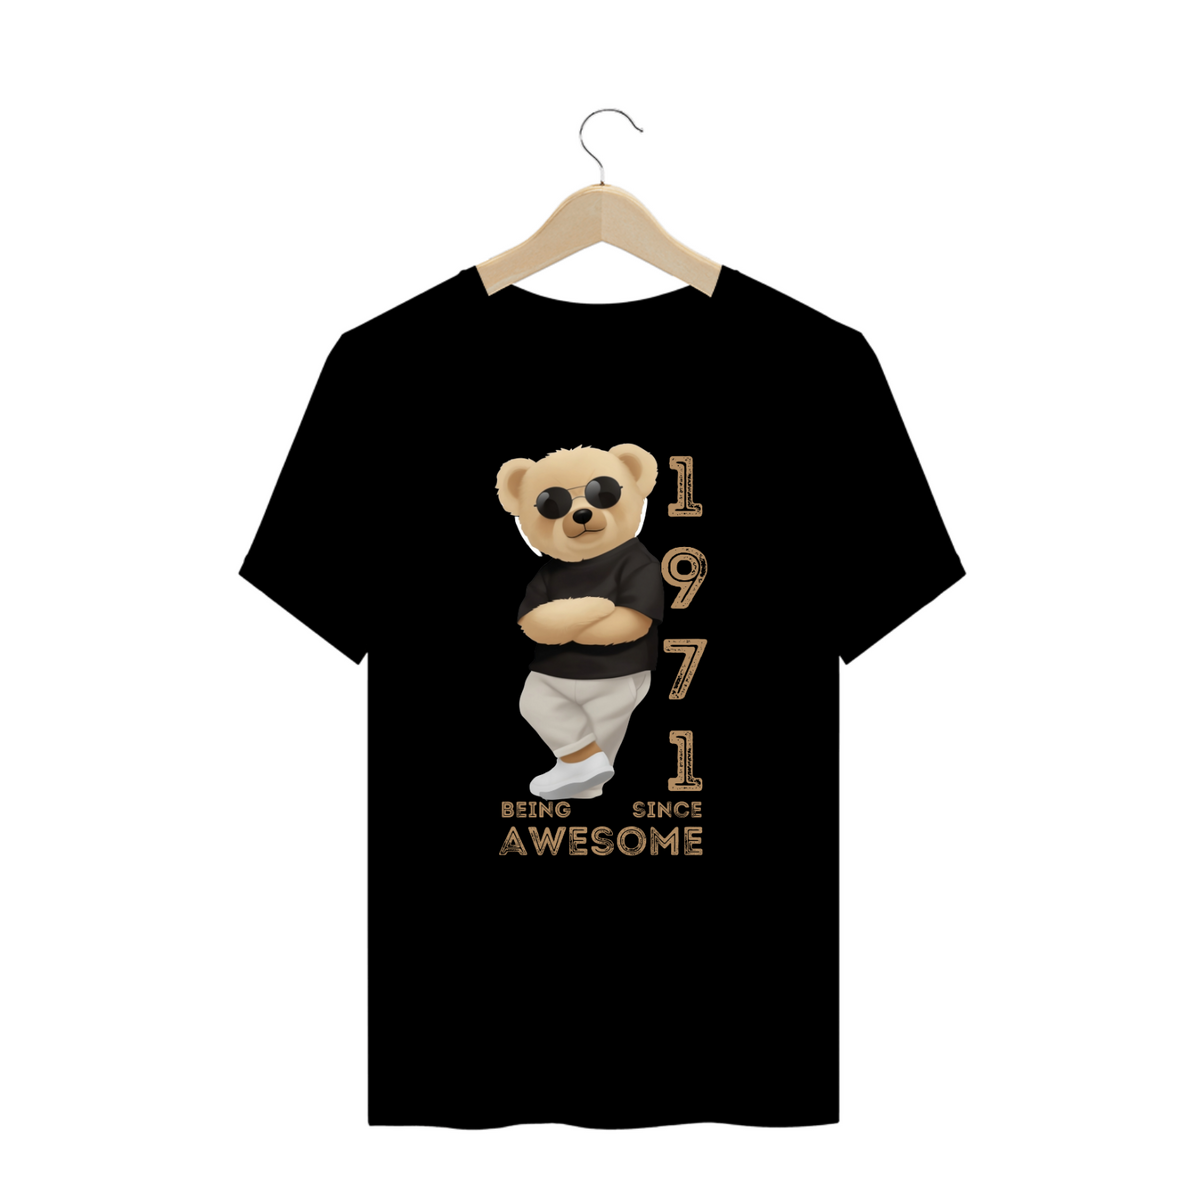 Nome do produto: Being Awesome 1971 Teddy Bear - Plus Size